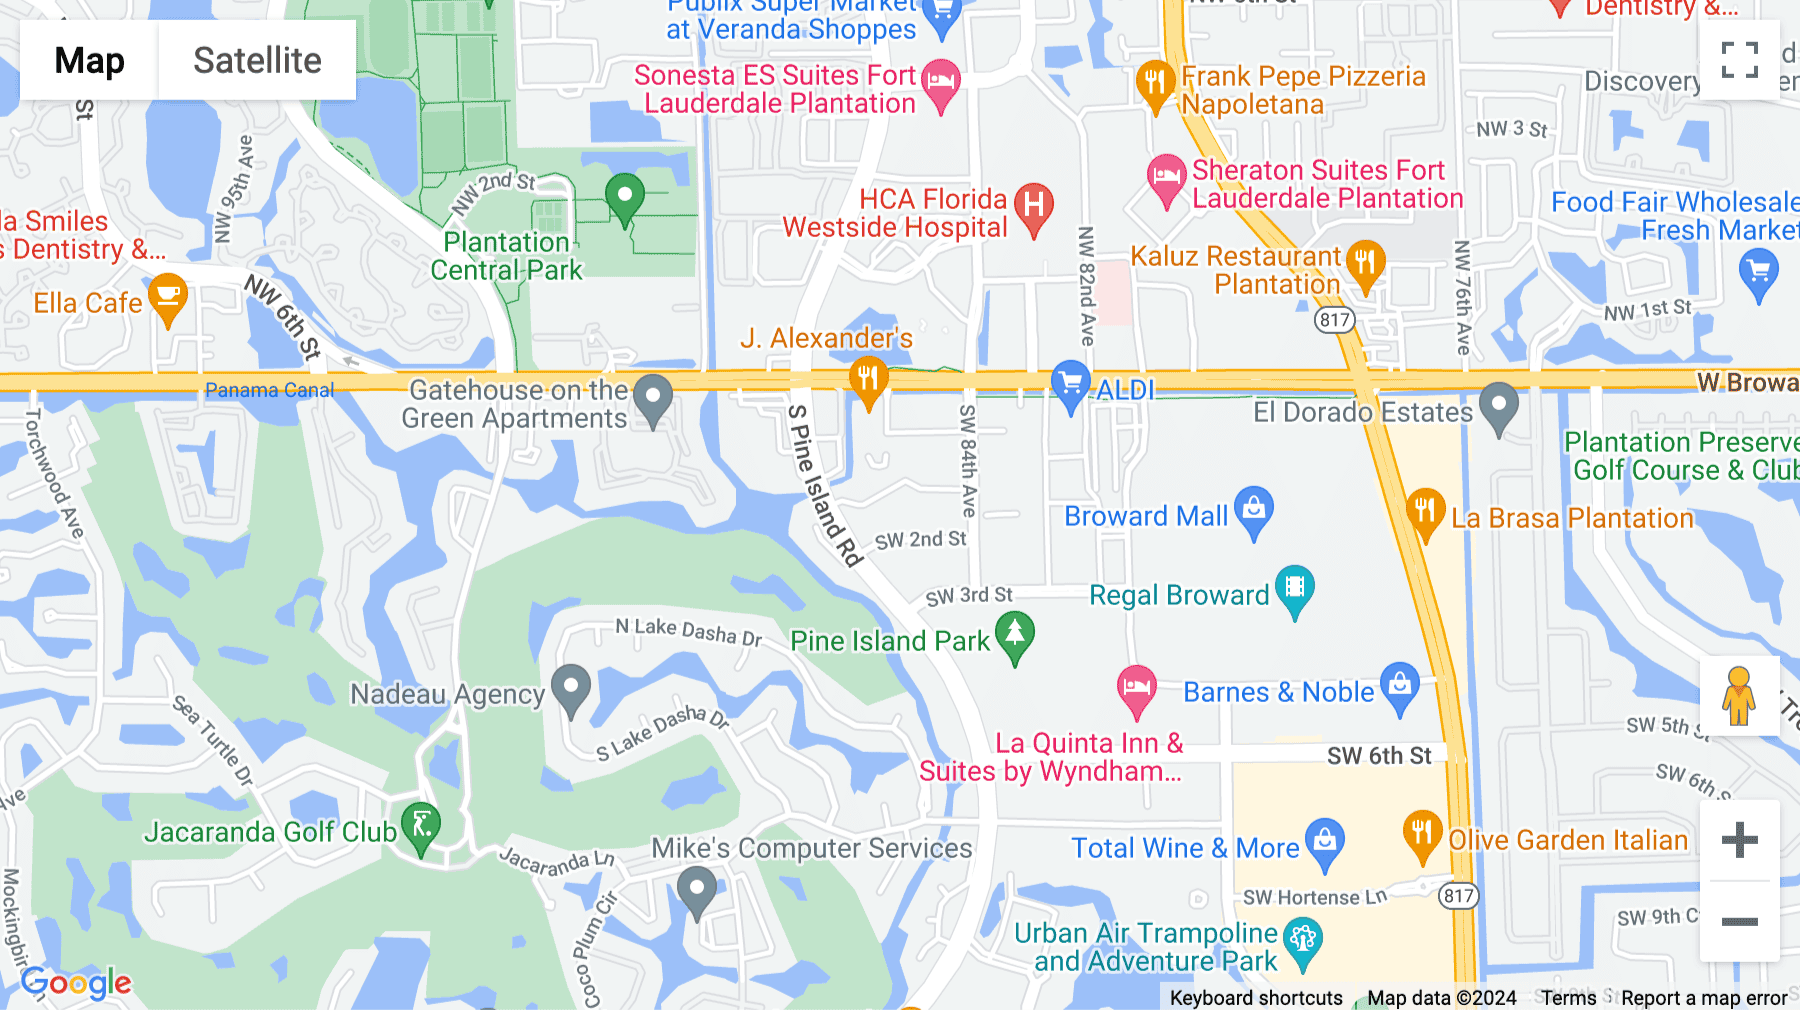 Click for interative map of 150 S. Pine Island Road, Suite 300, Plantation